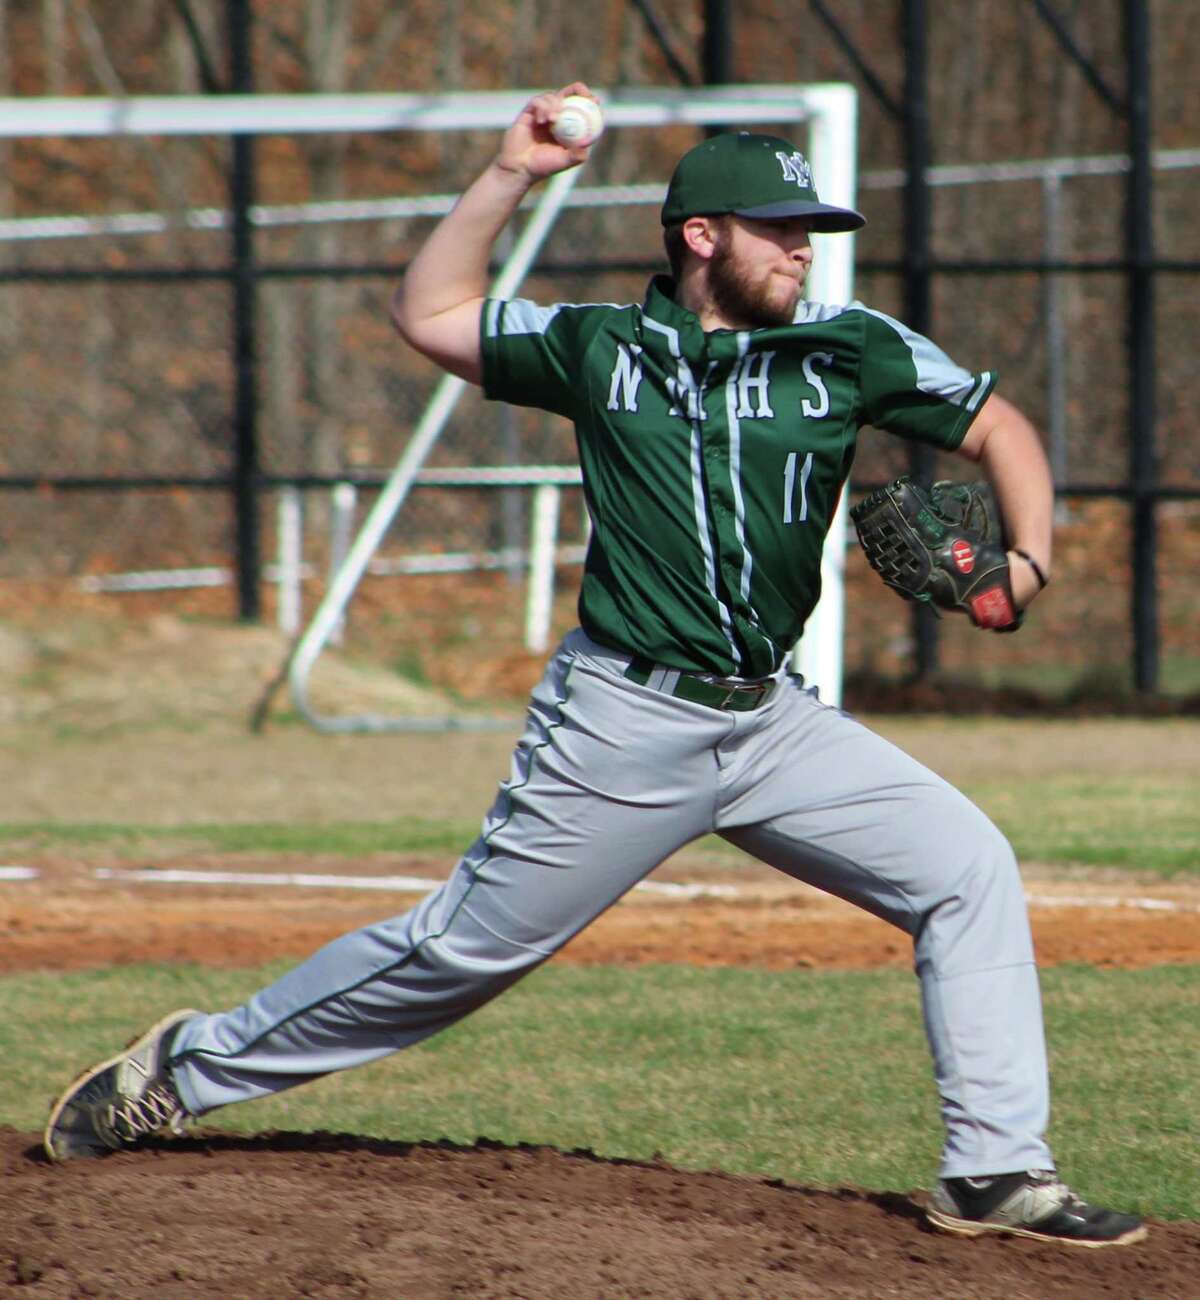 New Milford's Gavin Titus fires a pitch during the baseball game at Abbott Tech in Danbury April 5, 2017.